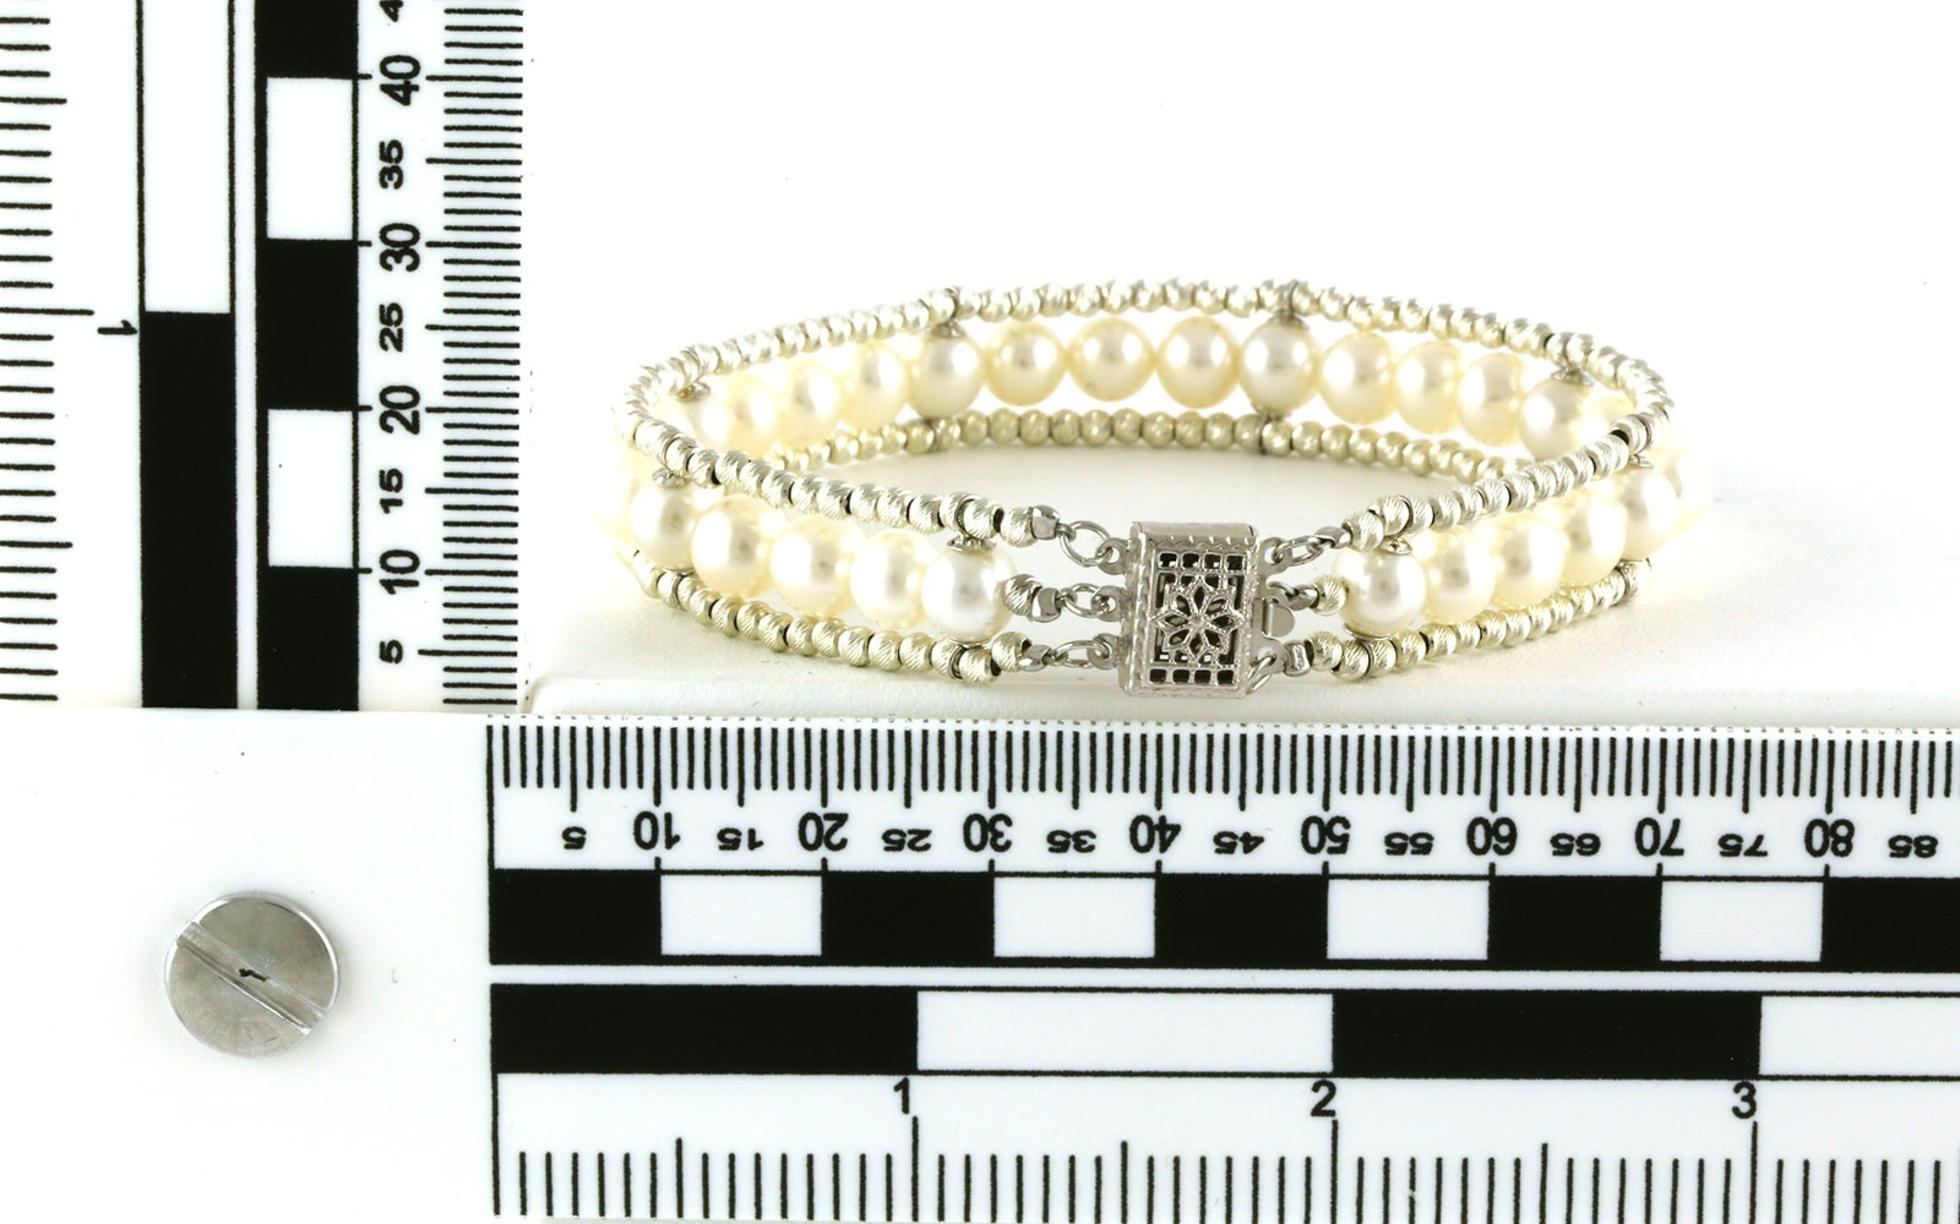 Triple Row Sparkle Bead and Pearl Bracelet in Sterling Silver  scale